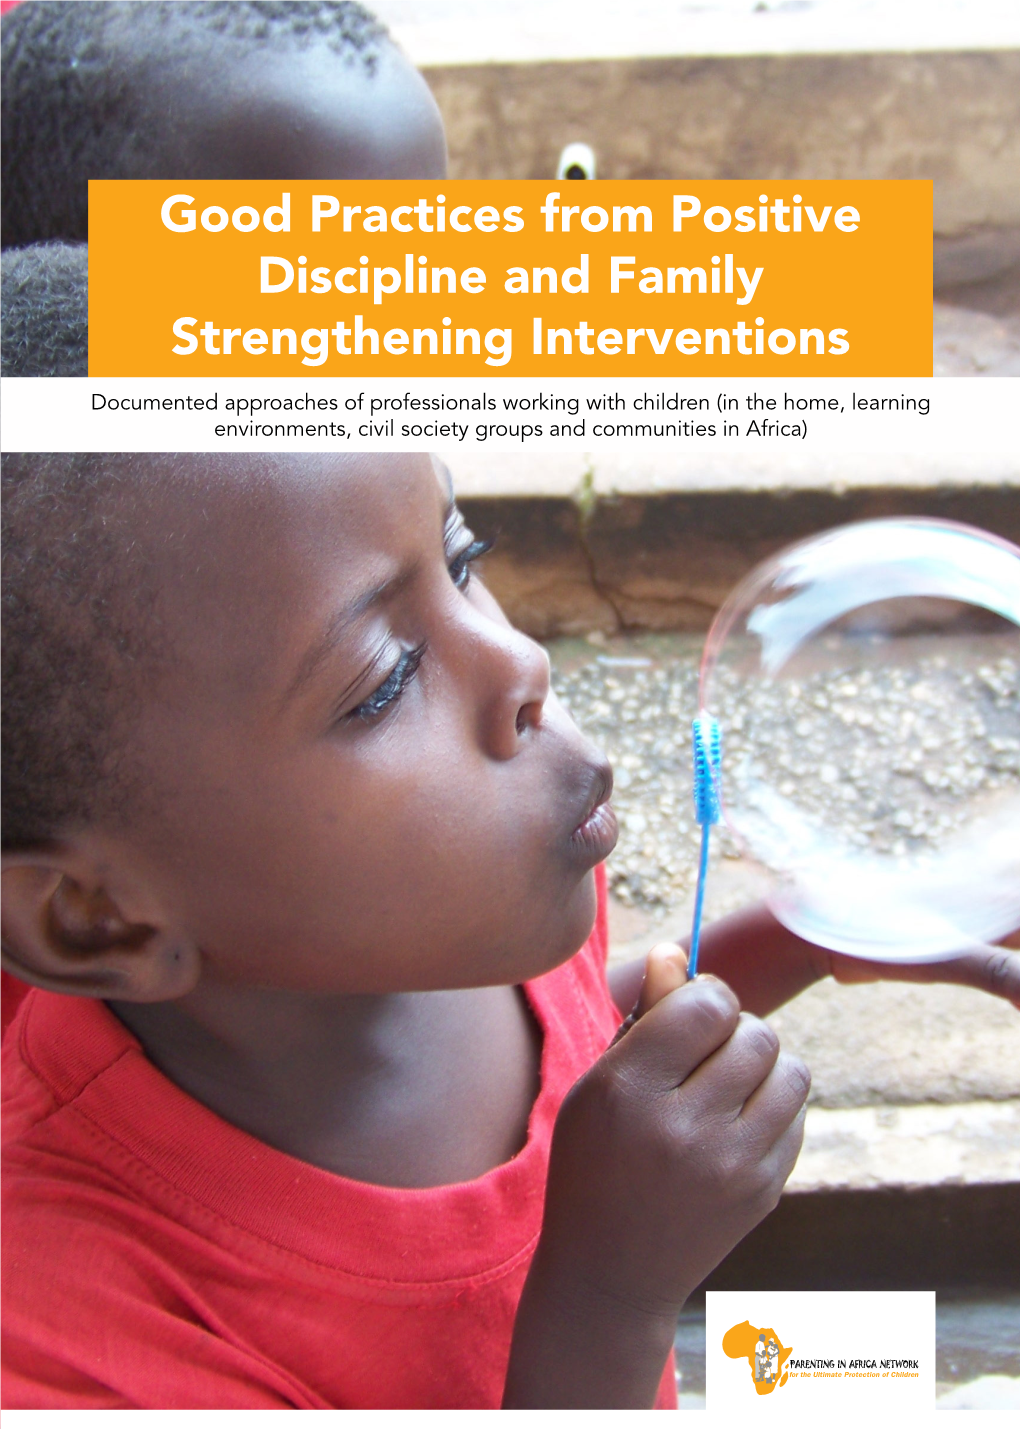 Good Practices from Positive Discipline and Family